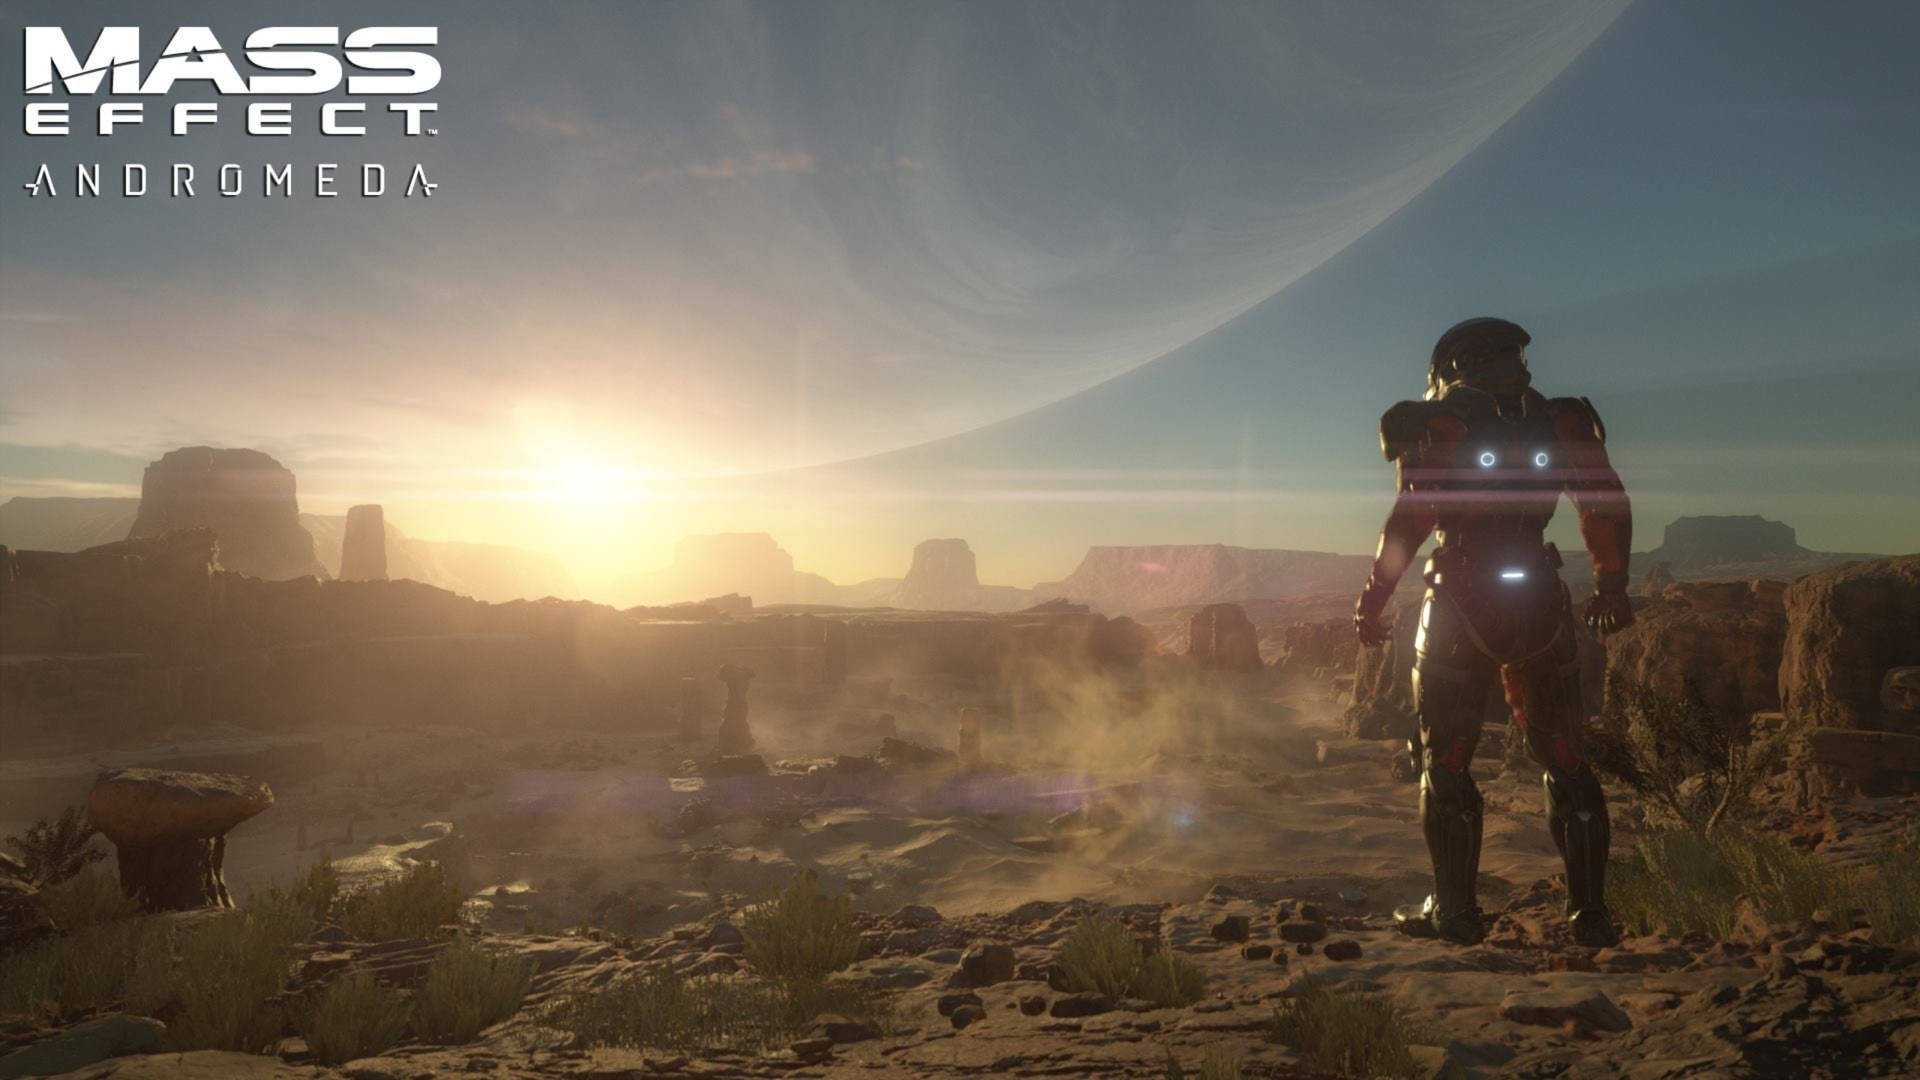 Mass Effect Andromeda Suit With Sunset Background